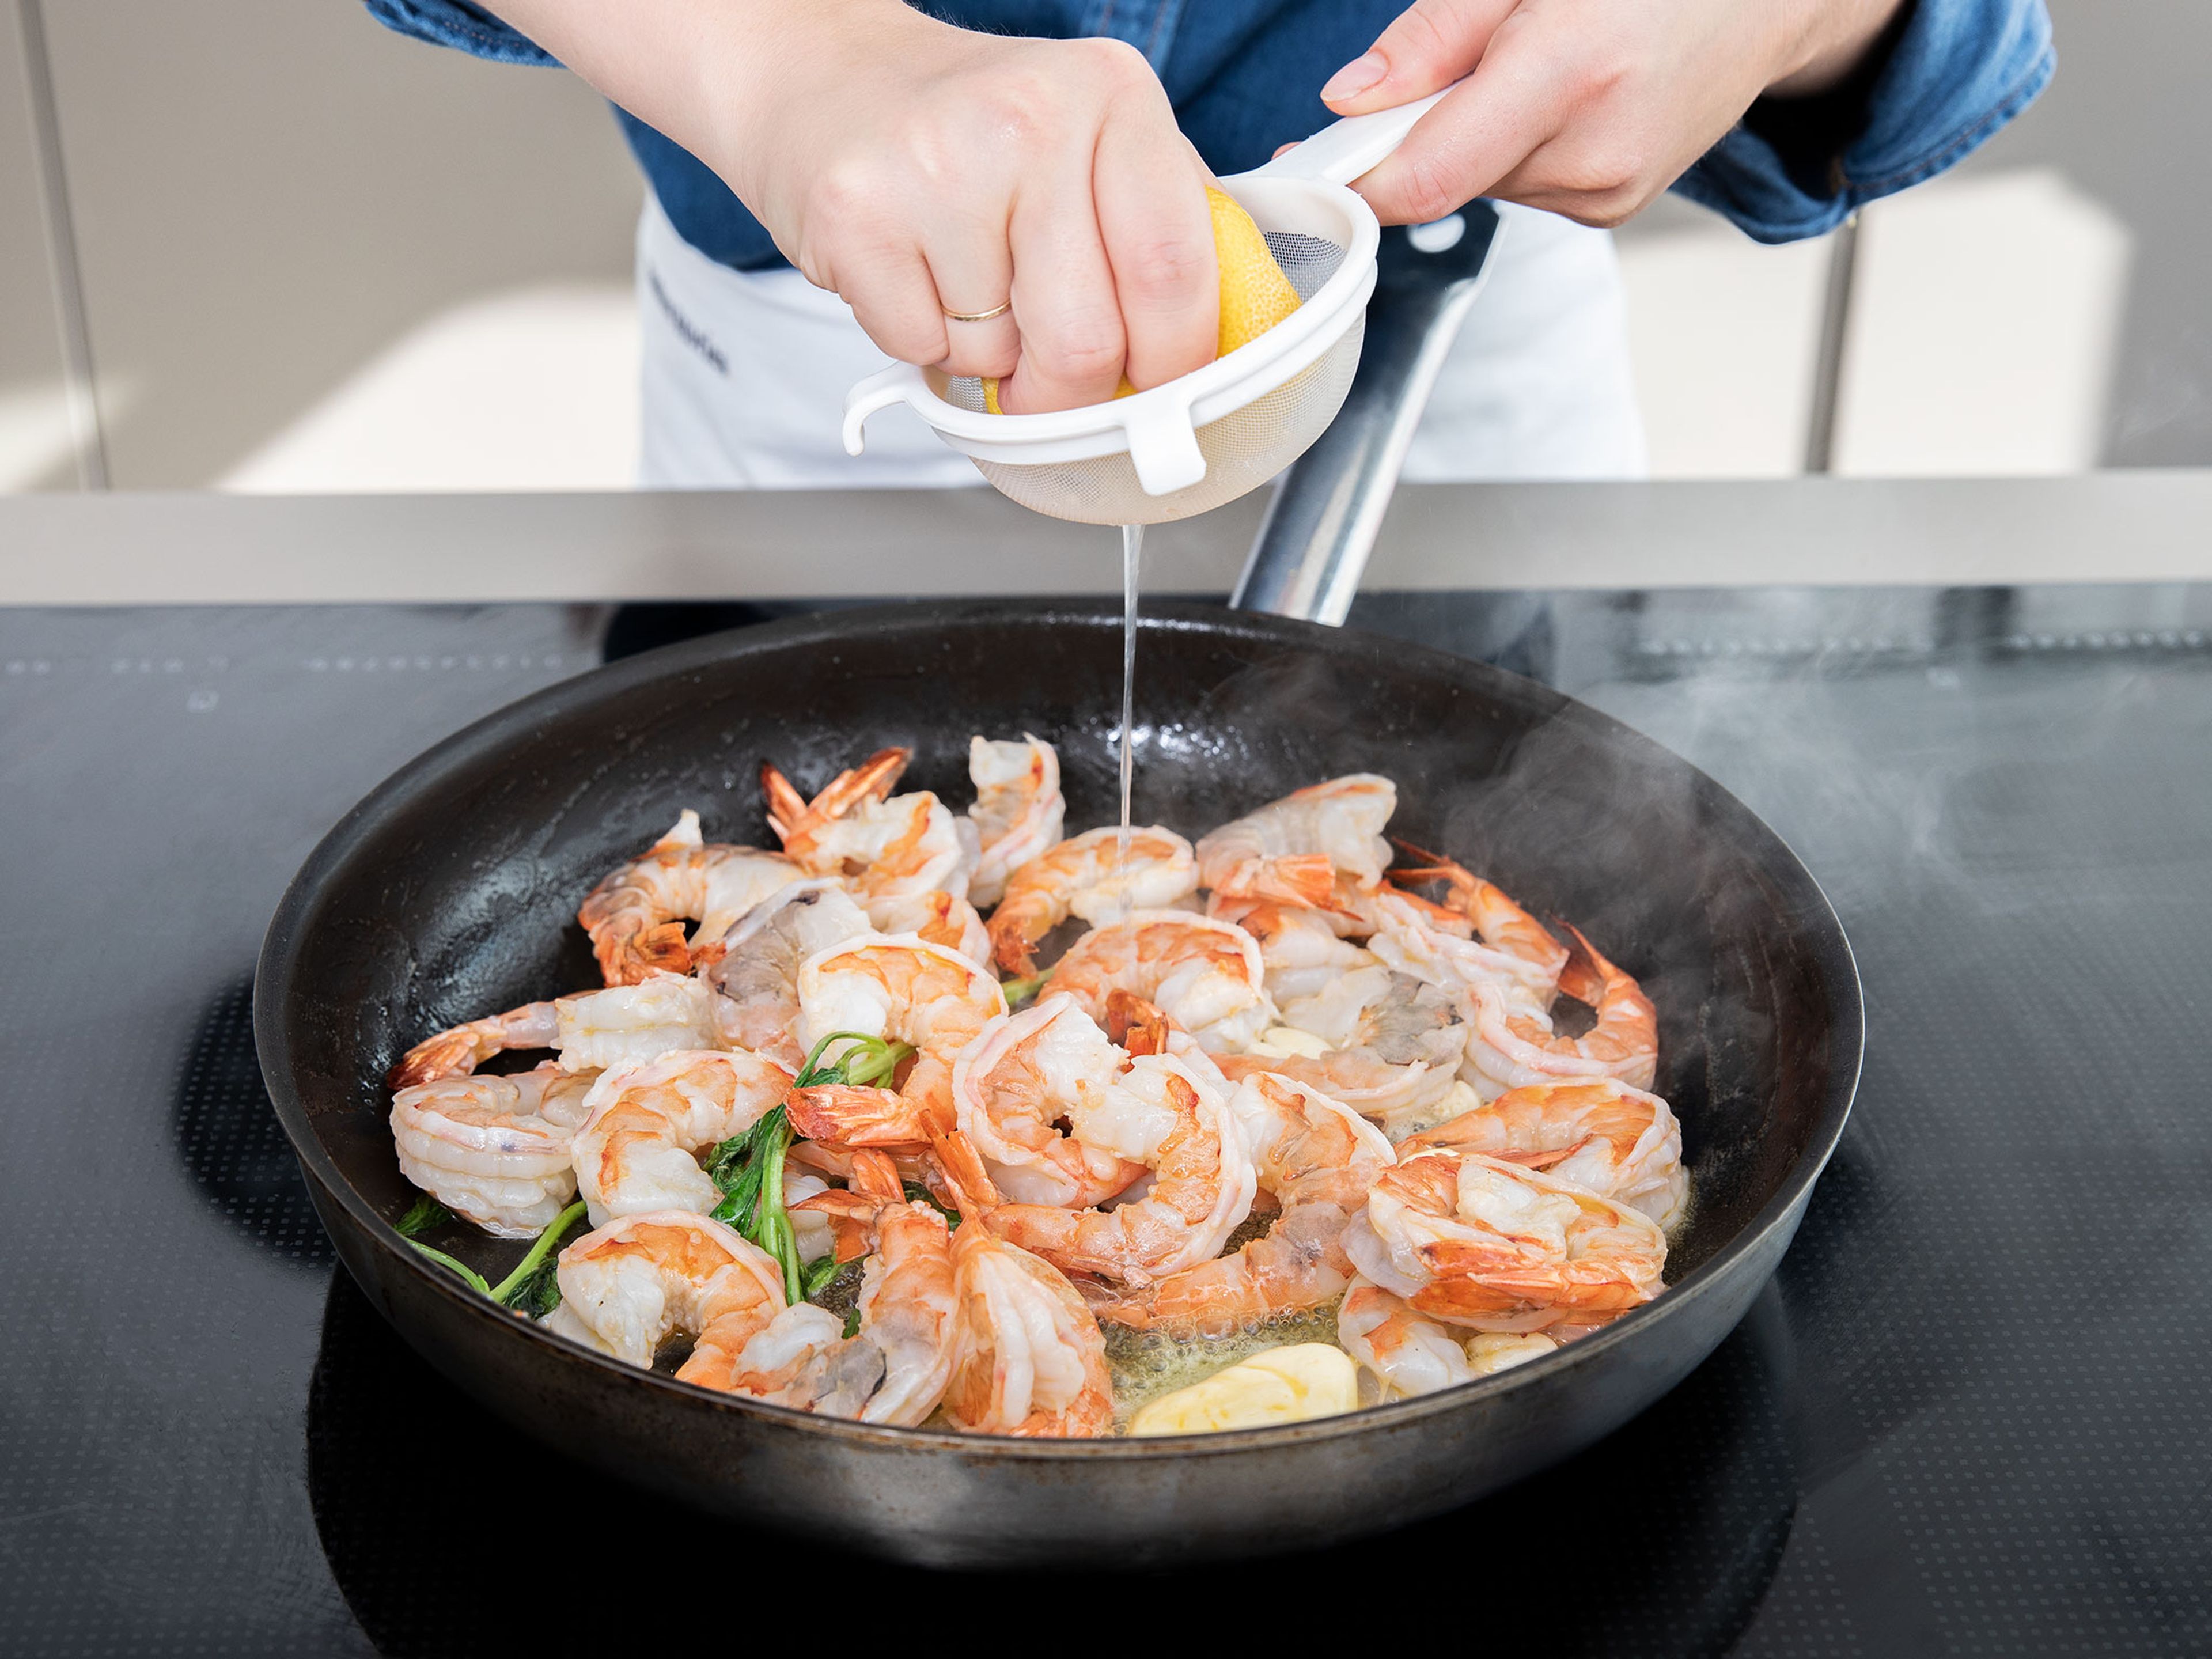 Heat remaining olive oil in a large frying pan and fry shrimp for approx. 1 – 2 min. or until cooked through. Add remaining butter, remaining garlic clove, basil, and lemon juice. Season with salt and pepper. Serve risotto with shrimp on top. Enjoy!